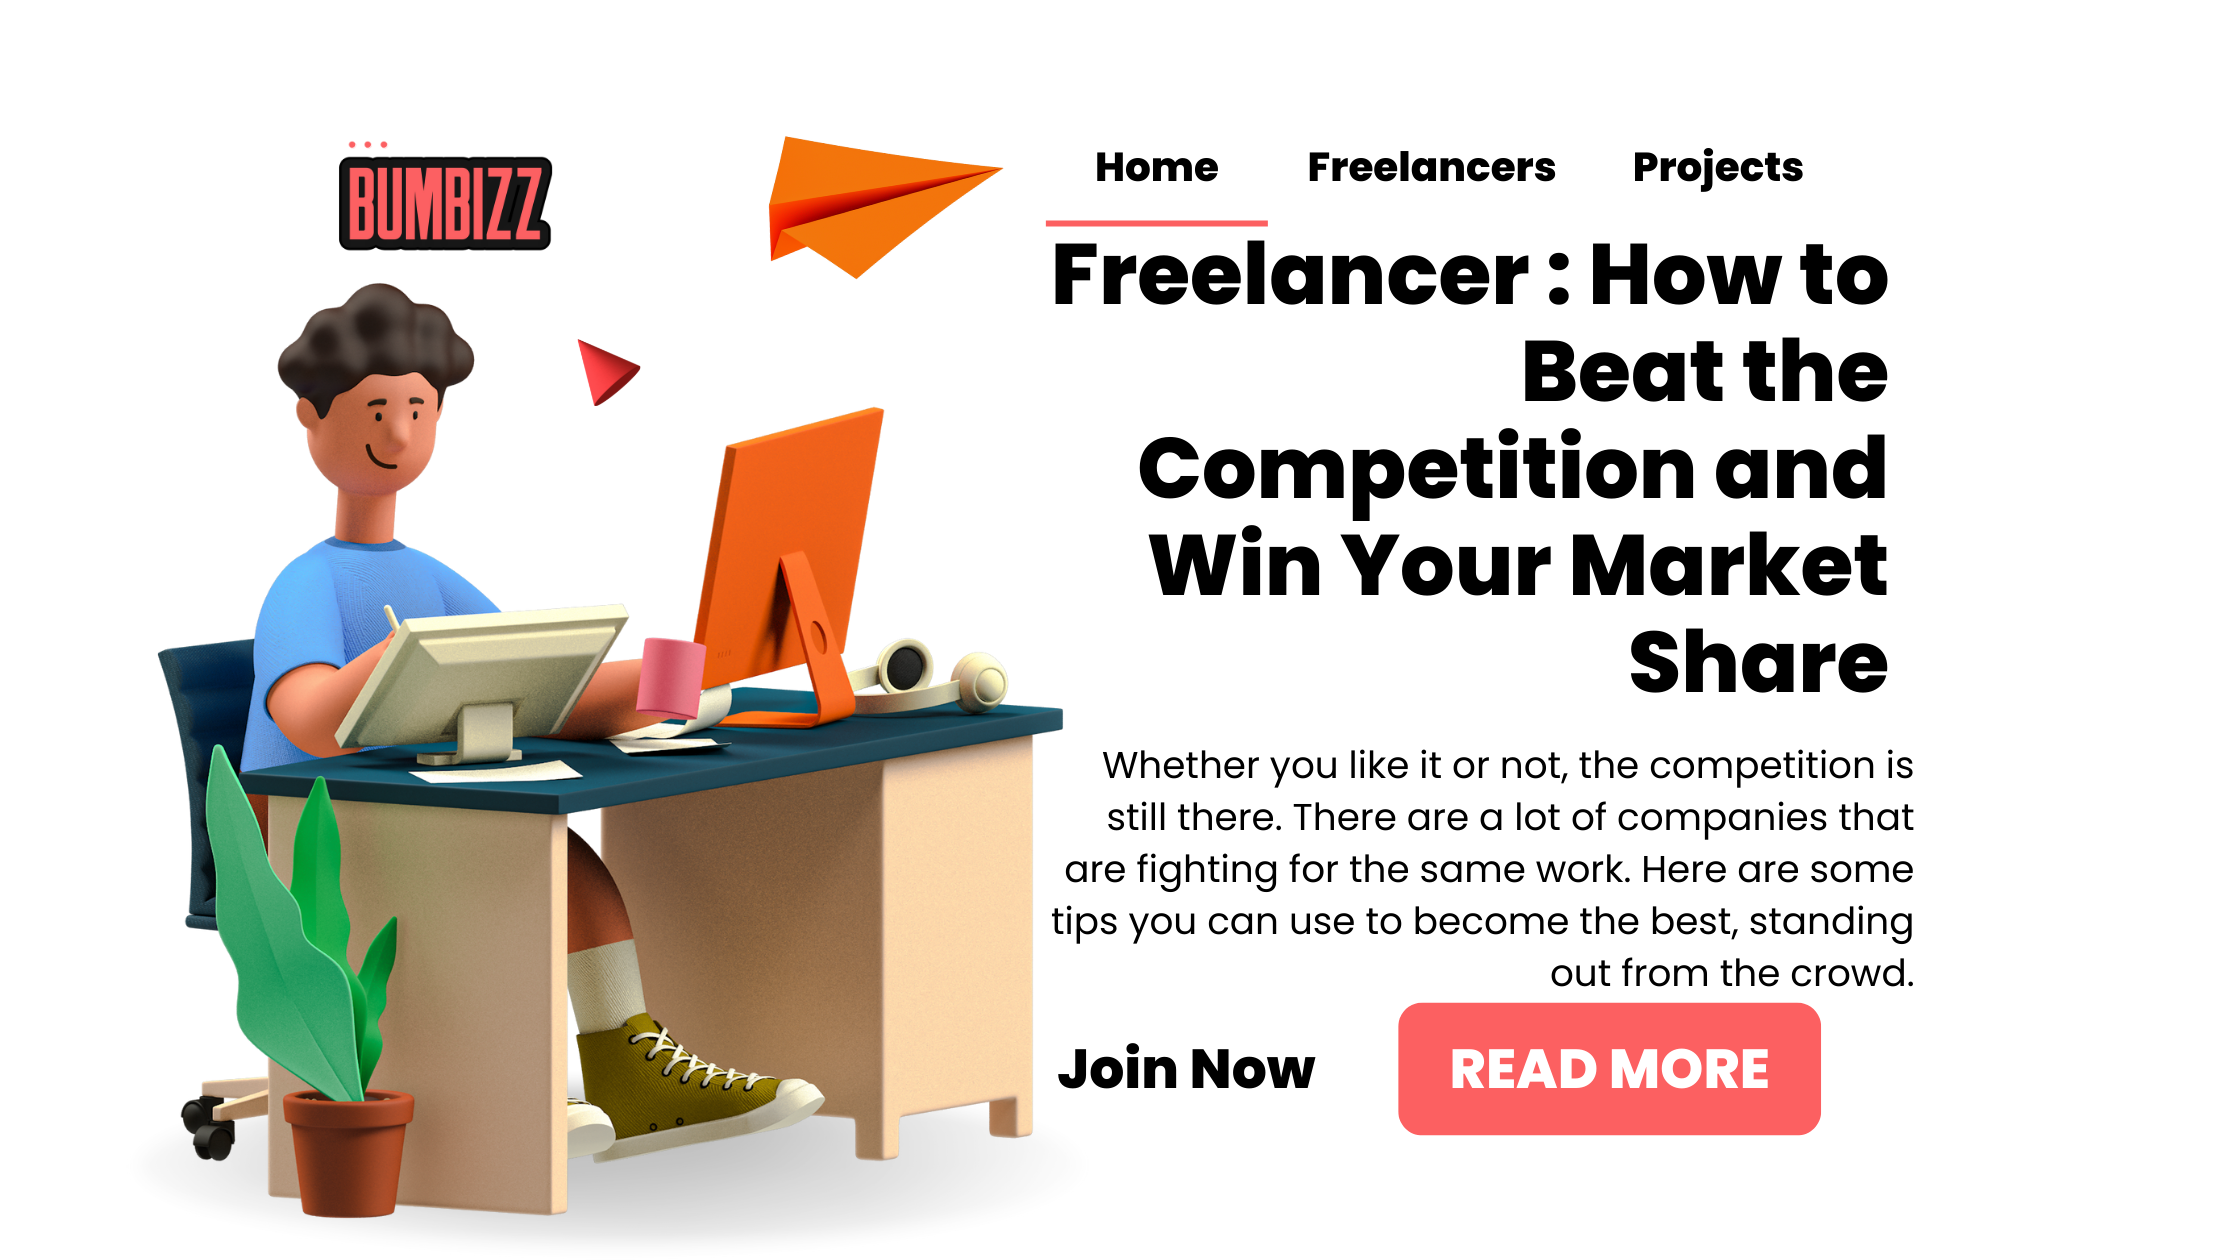 Freelancer: How to beat the competition and win your market share